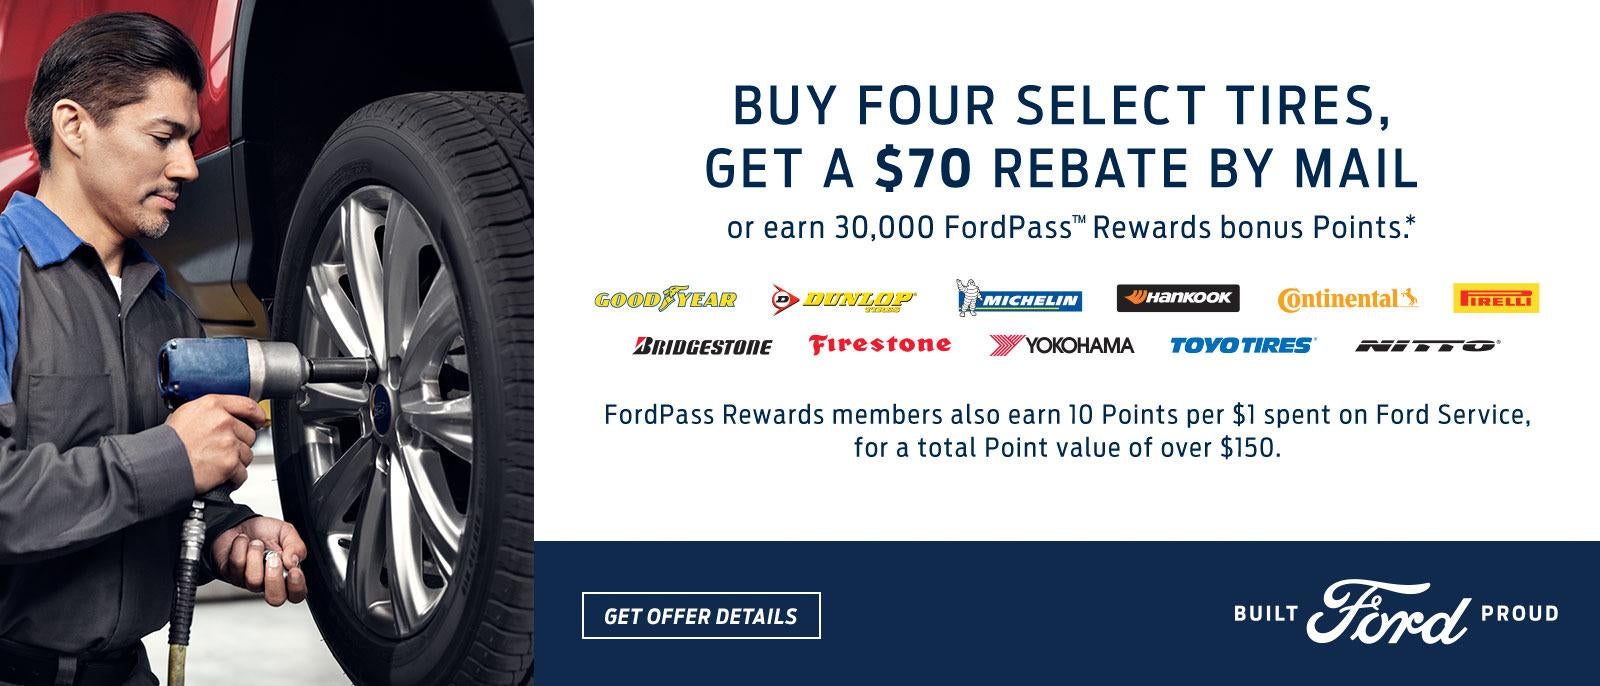 Buy Four Select Tires and Get a $70 Rebate 